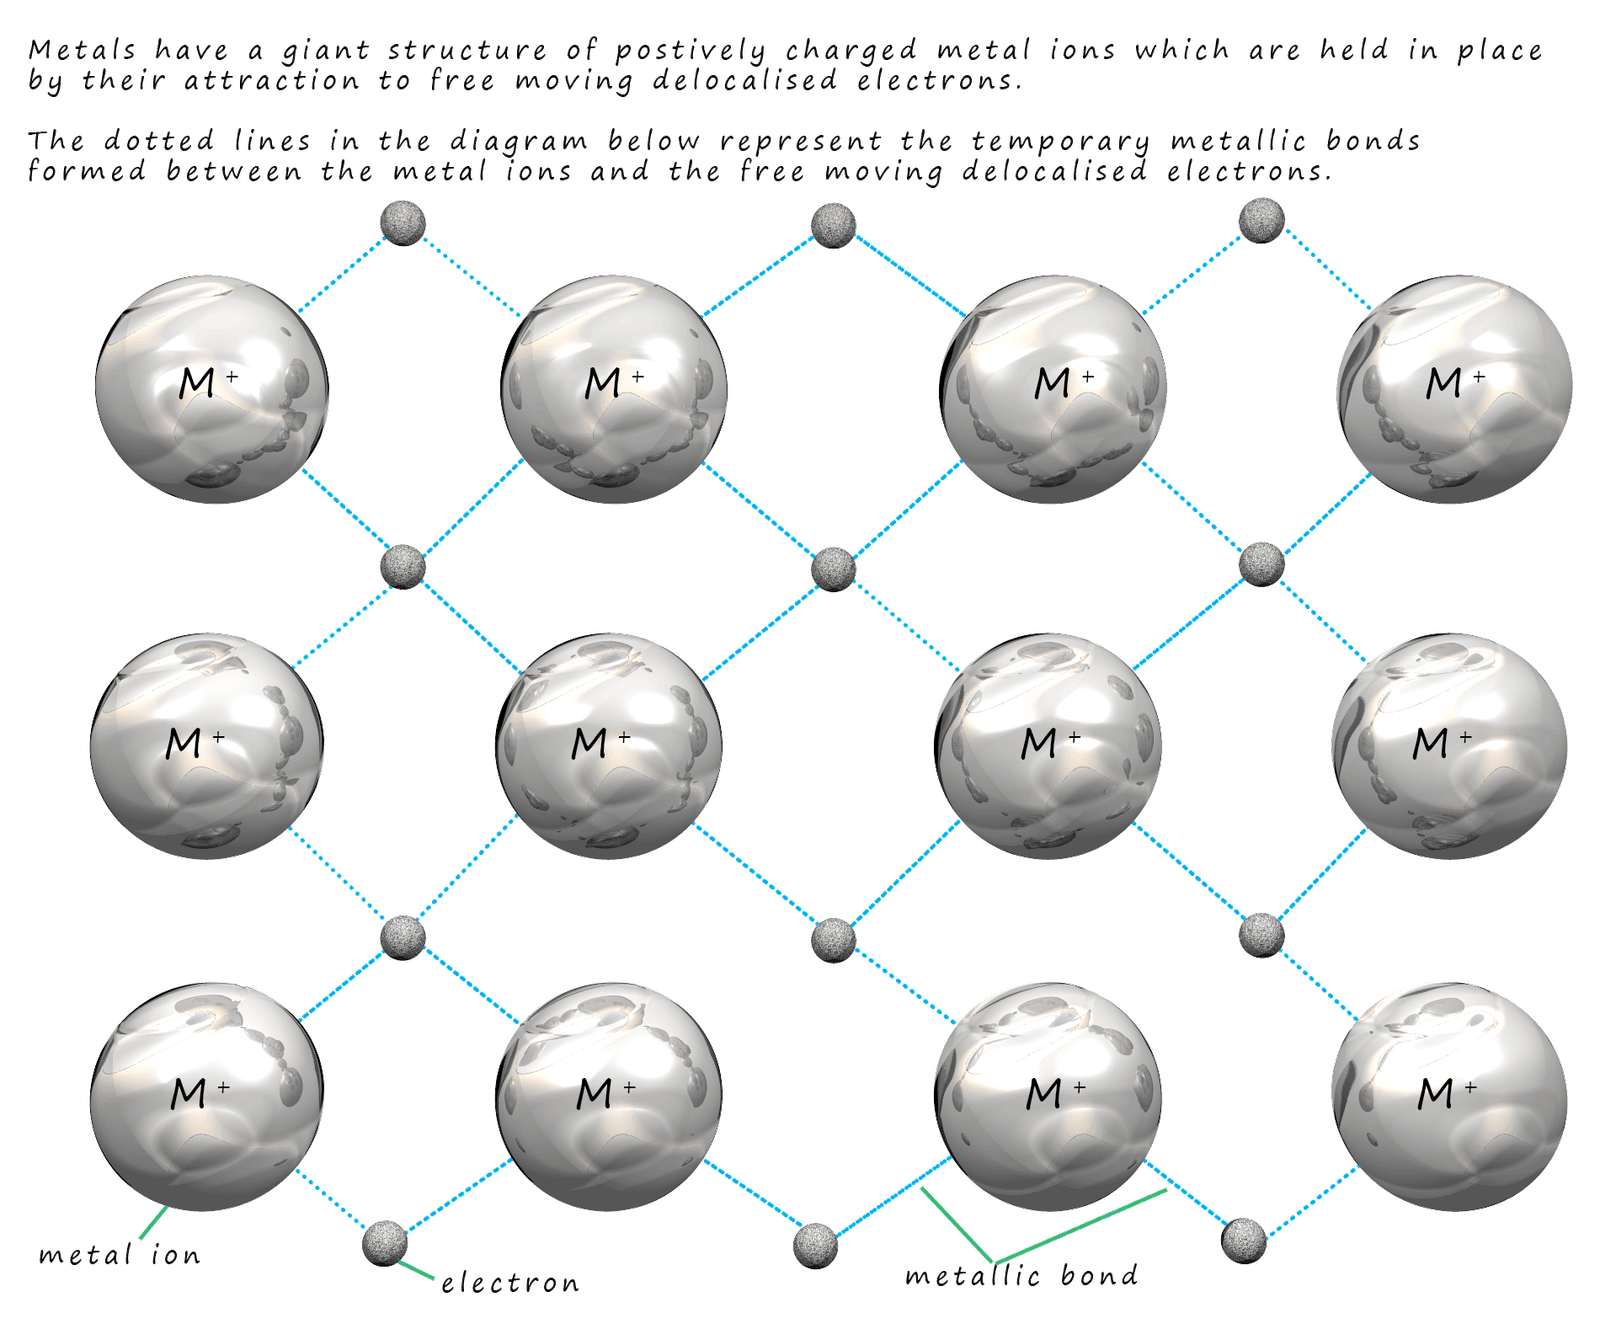 Model to show the nature of metallic bonding, the attraction of positively charged metal ions for the delocalised electrons.